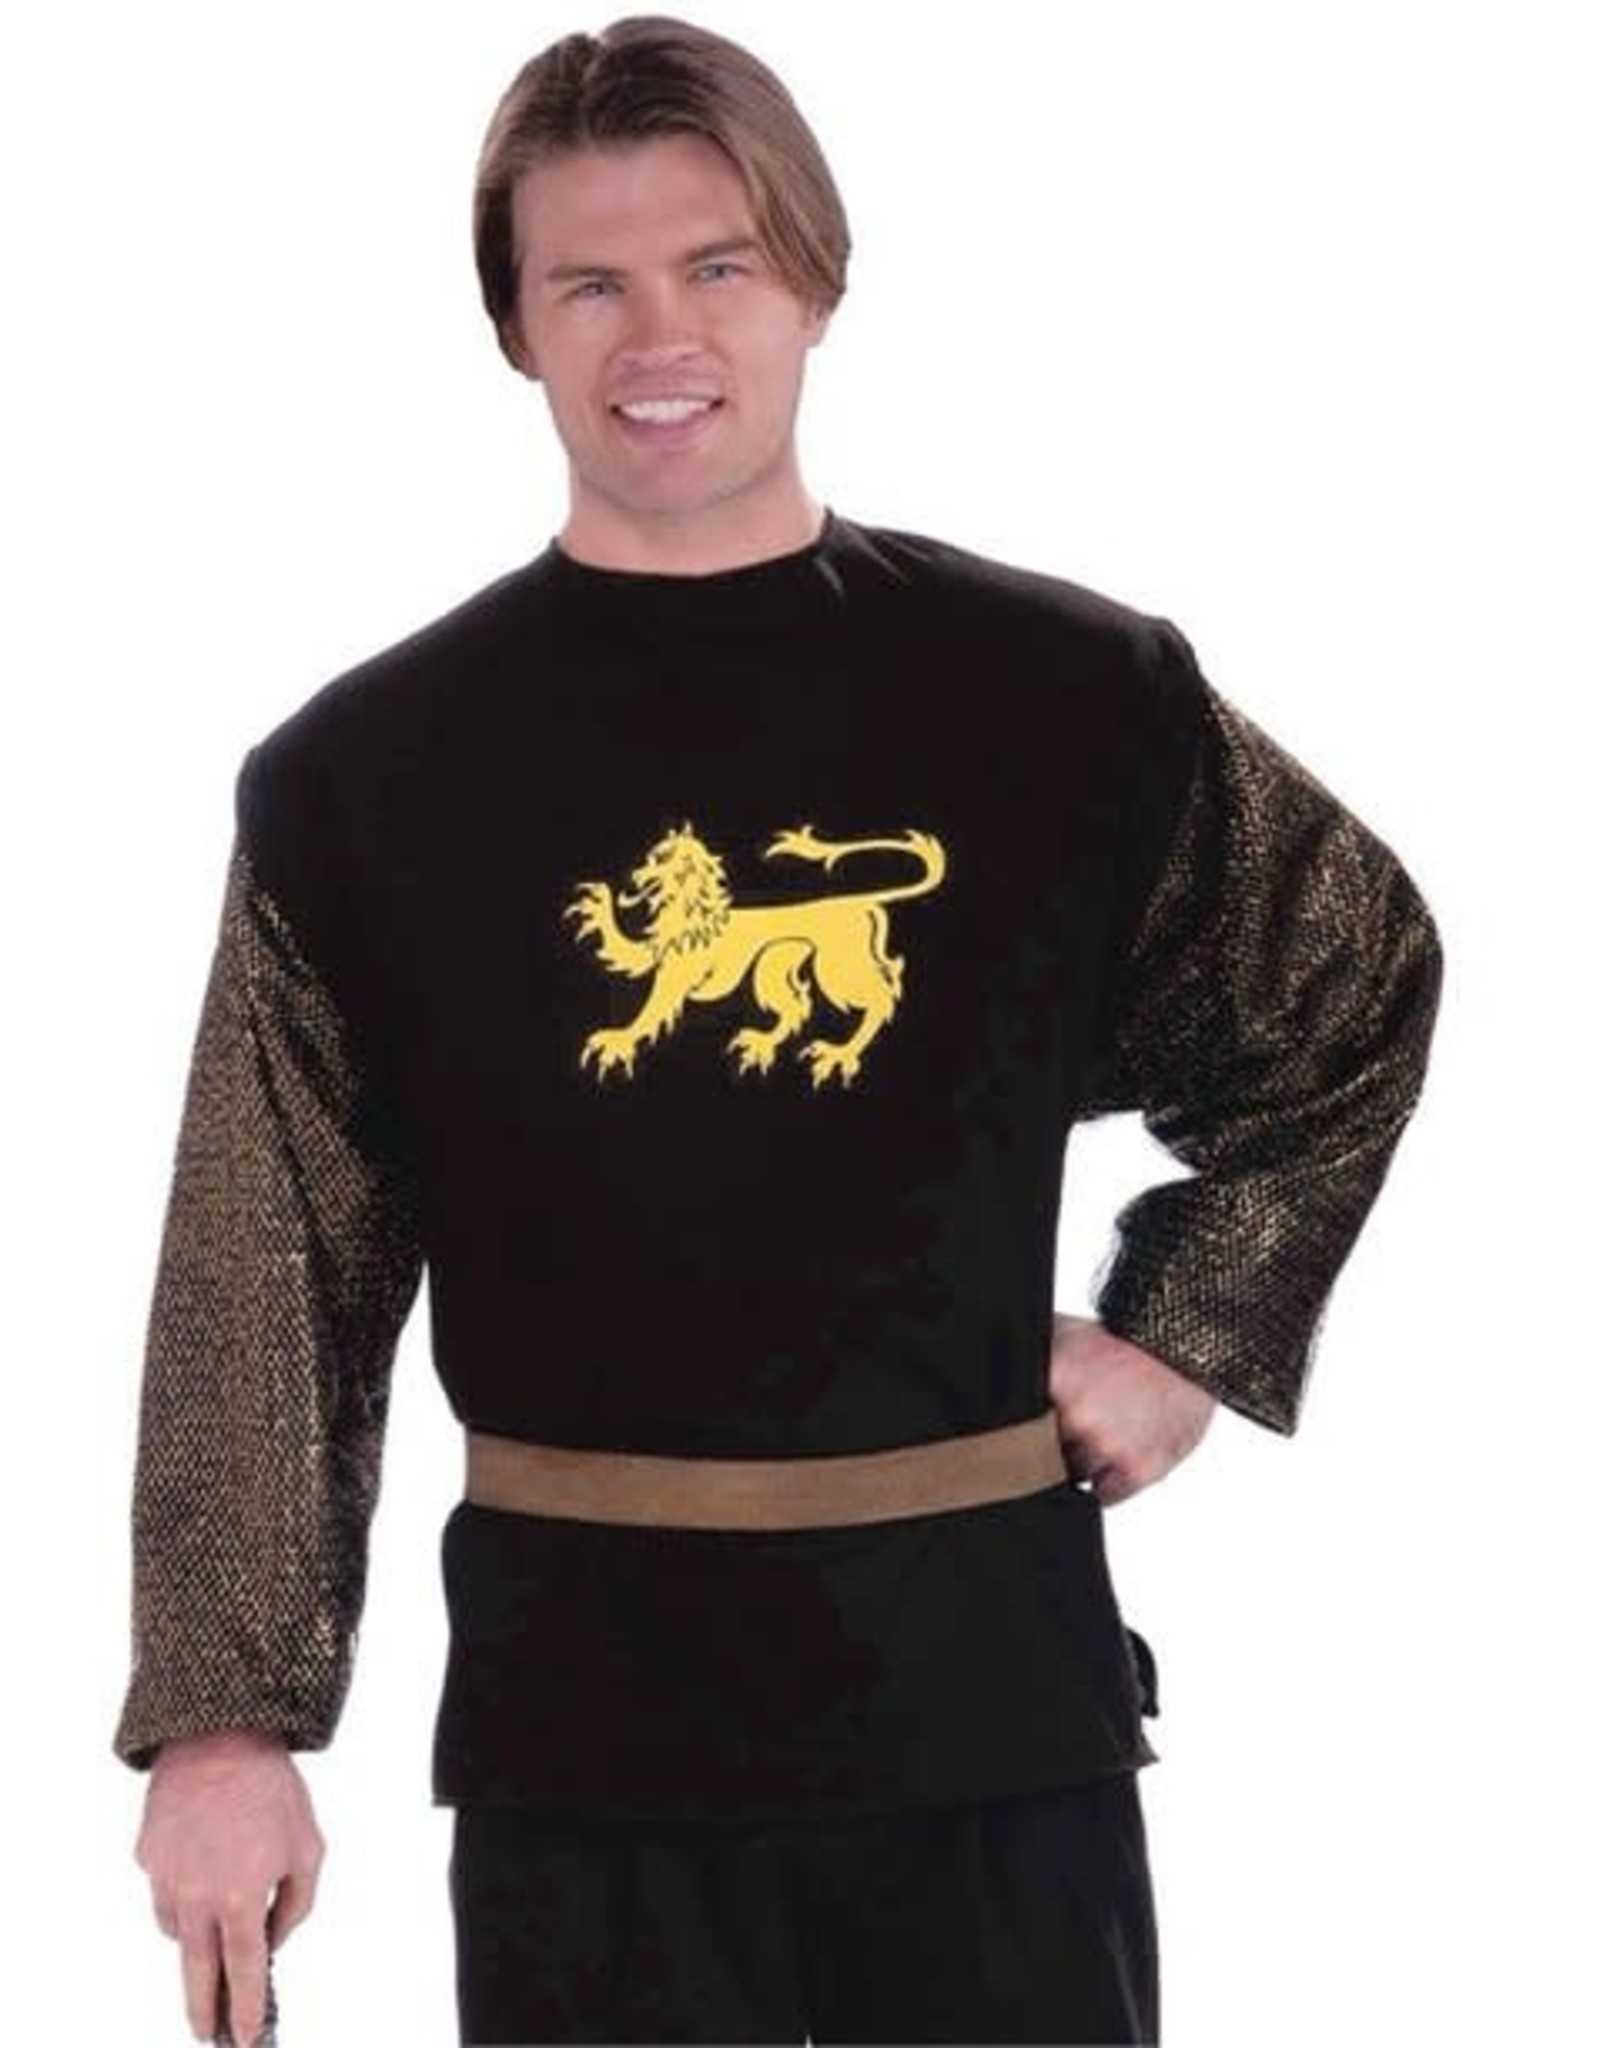 MEDIEVAL CHAINMAIL SHIRT